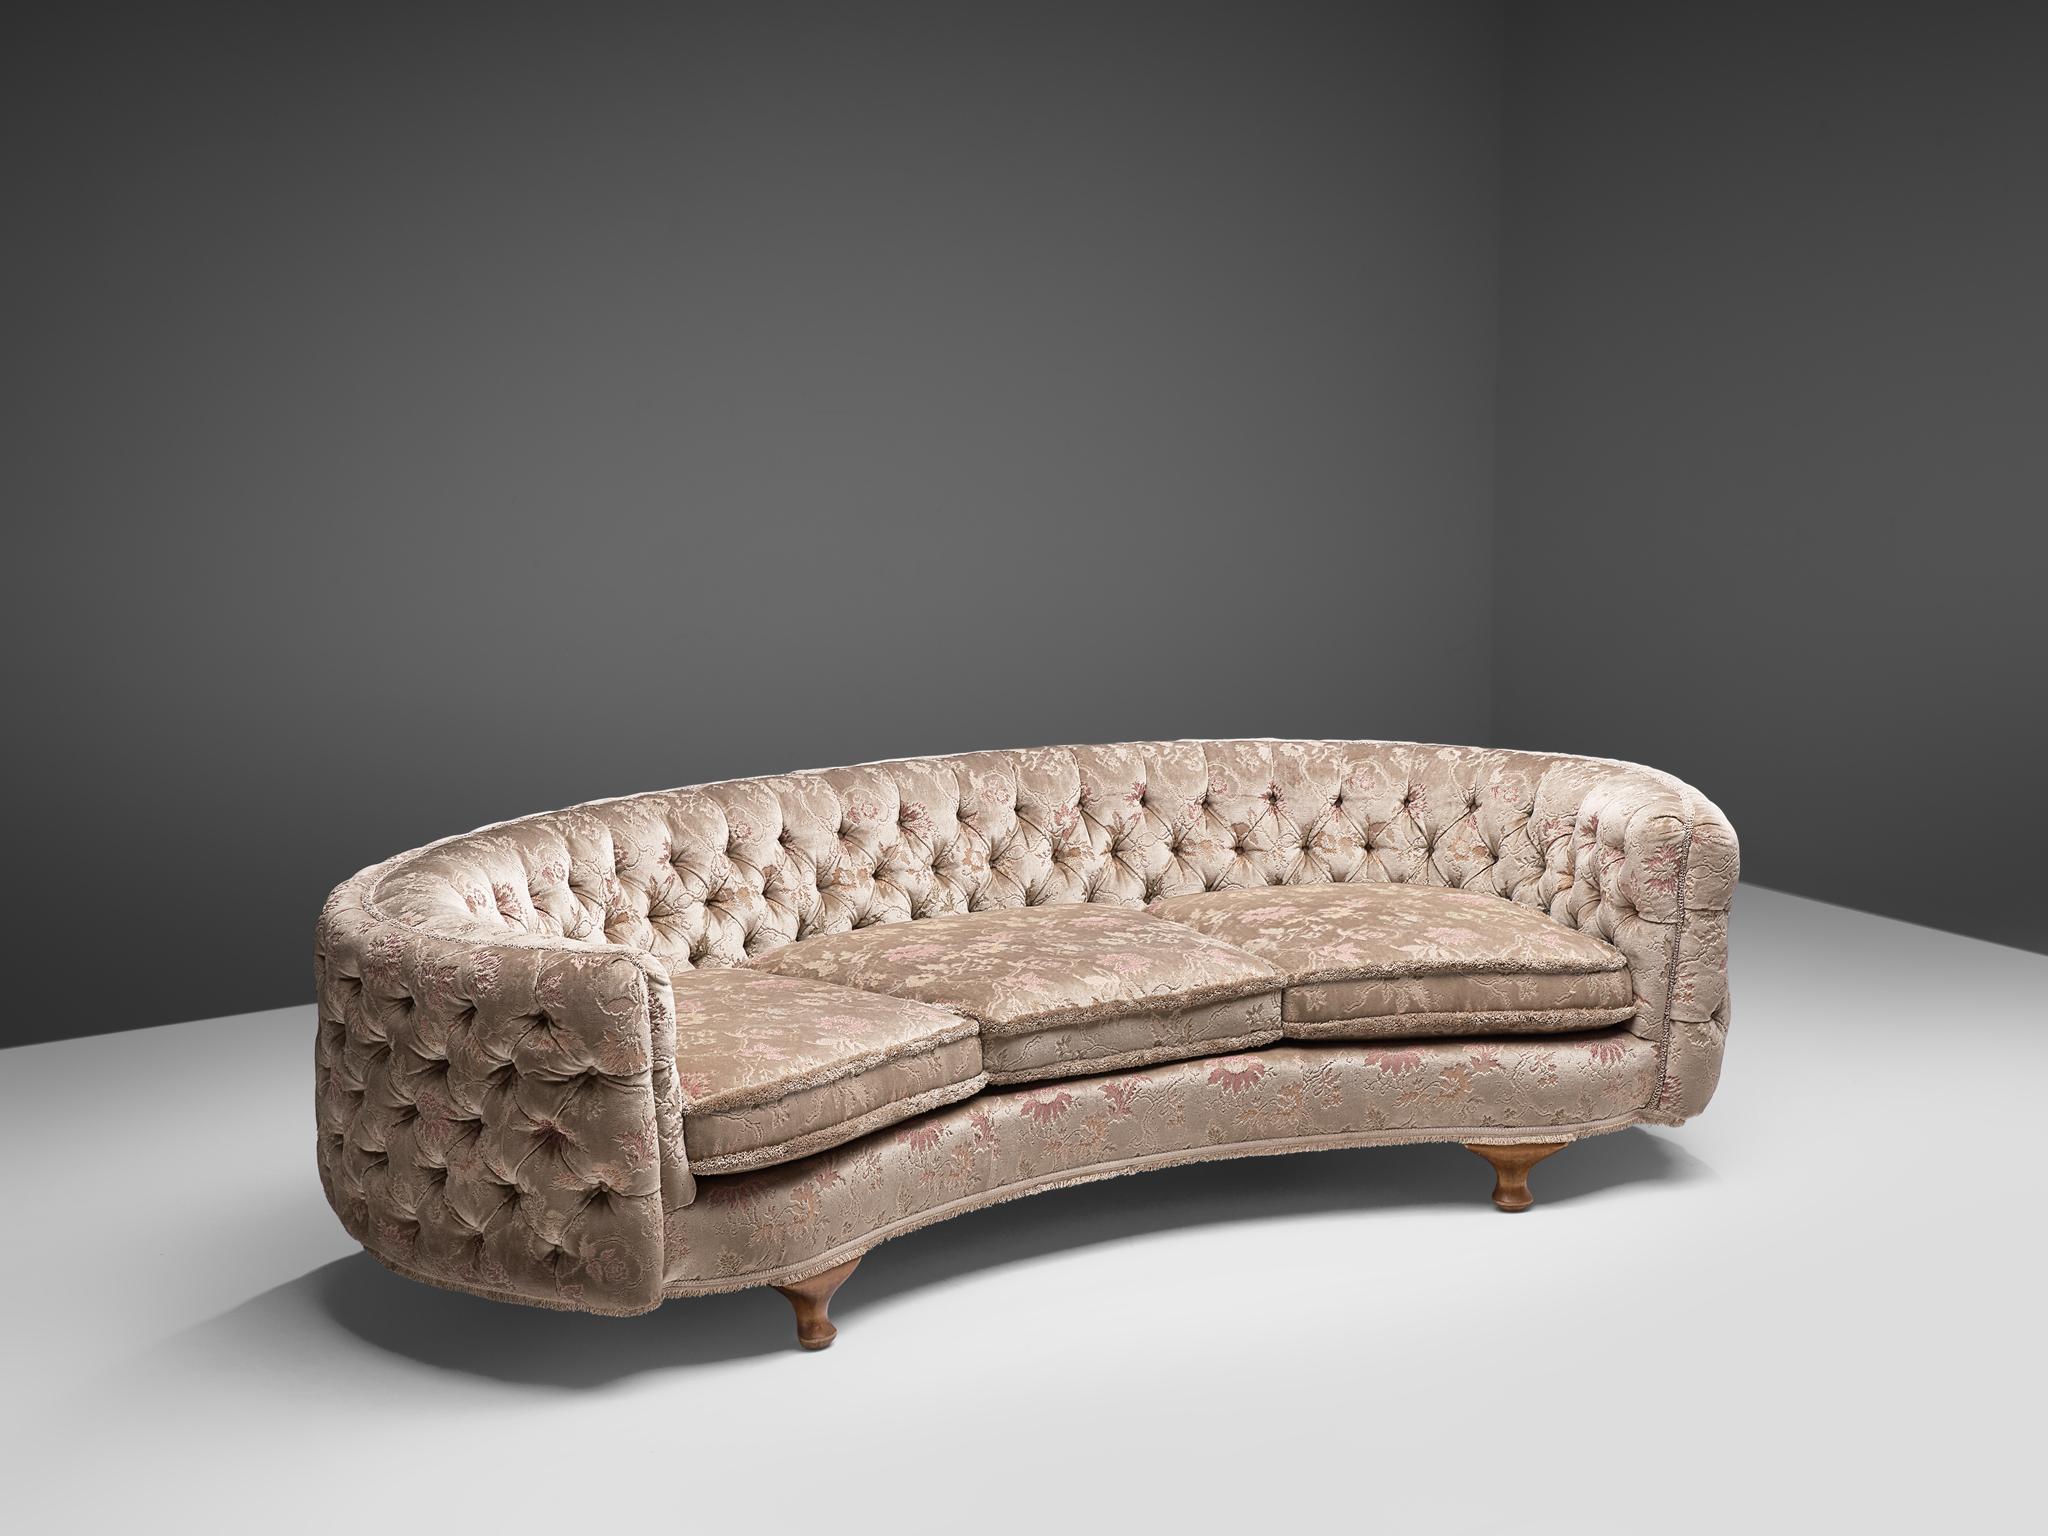 Banana sofa, beige floral fabric and oak, France, 1950s

This voluptuous sofa is executed with elegant wooden legs and a light colored, velvet fabric with a floral embroided pattern. The sofa is tufted in a theatrical way, in both the backrest as